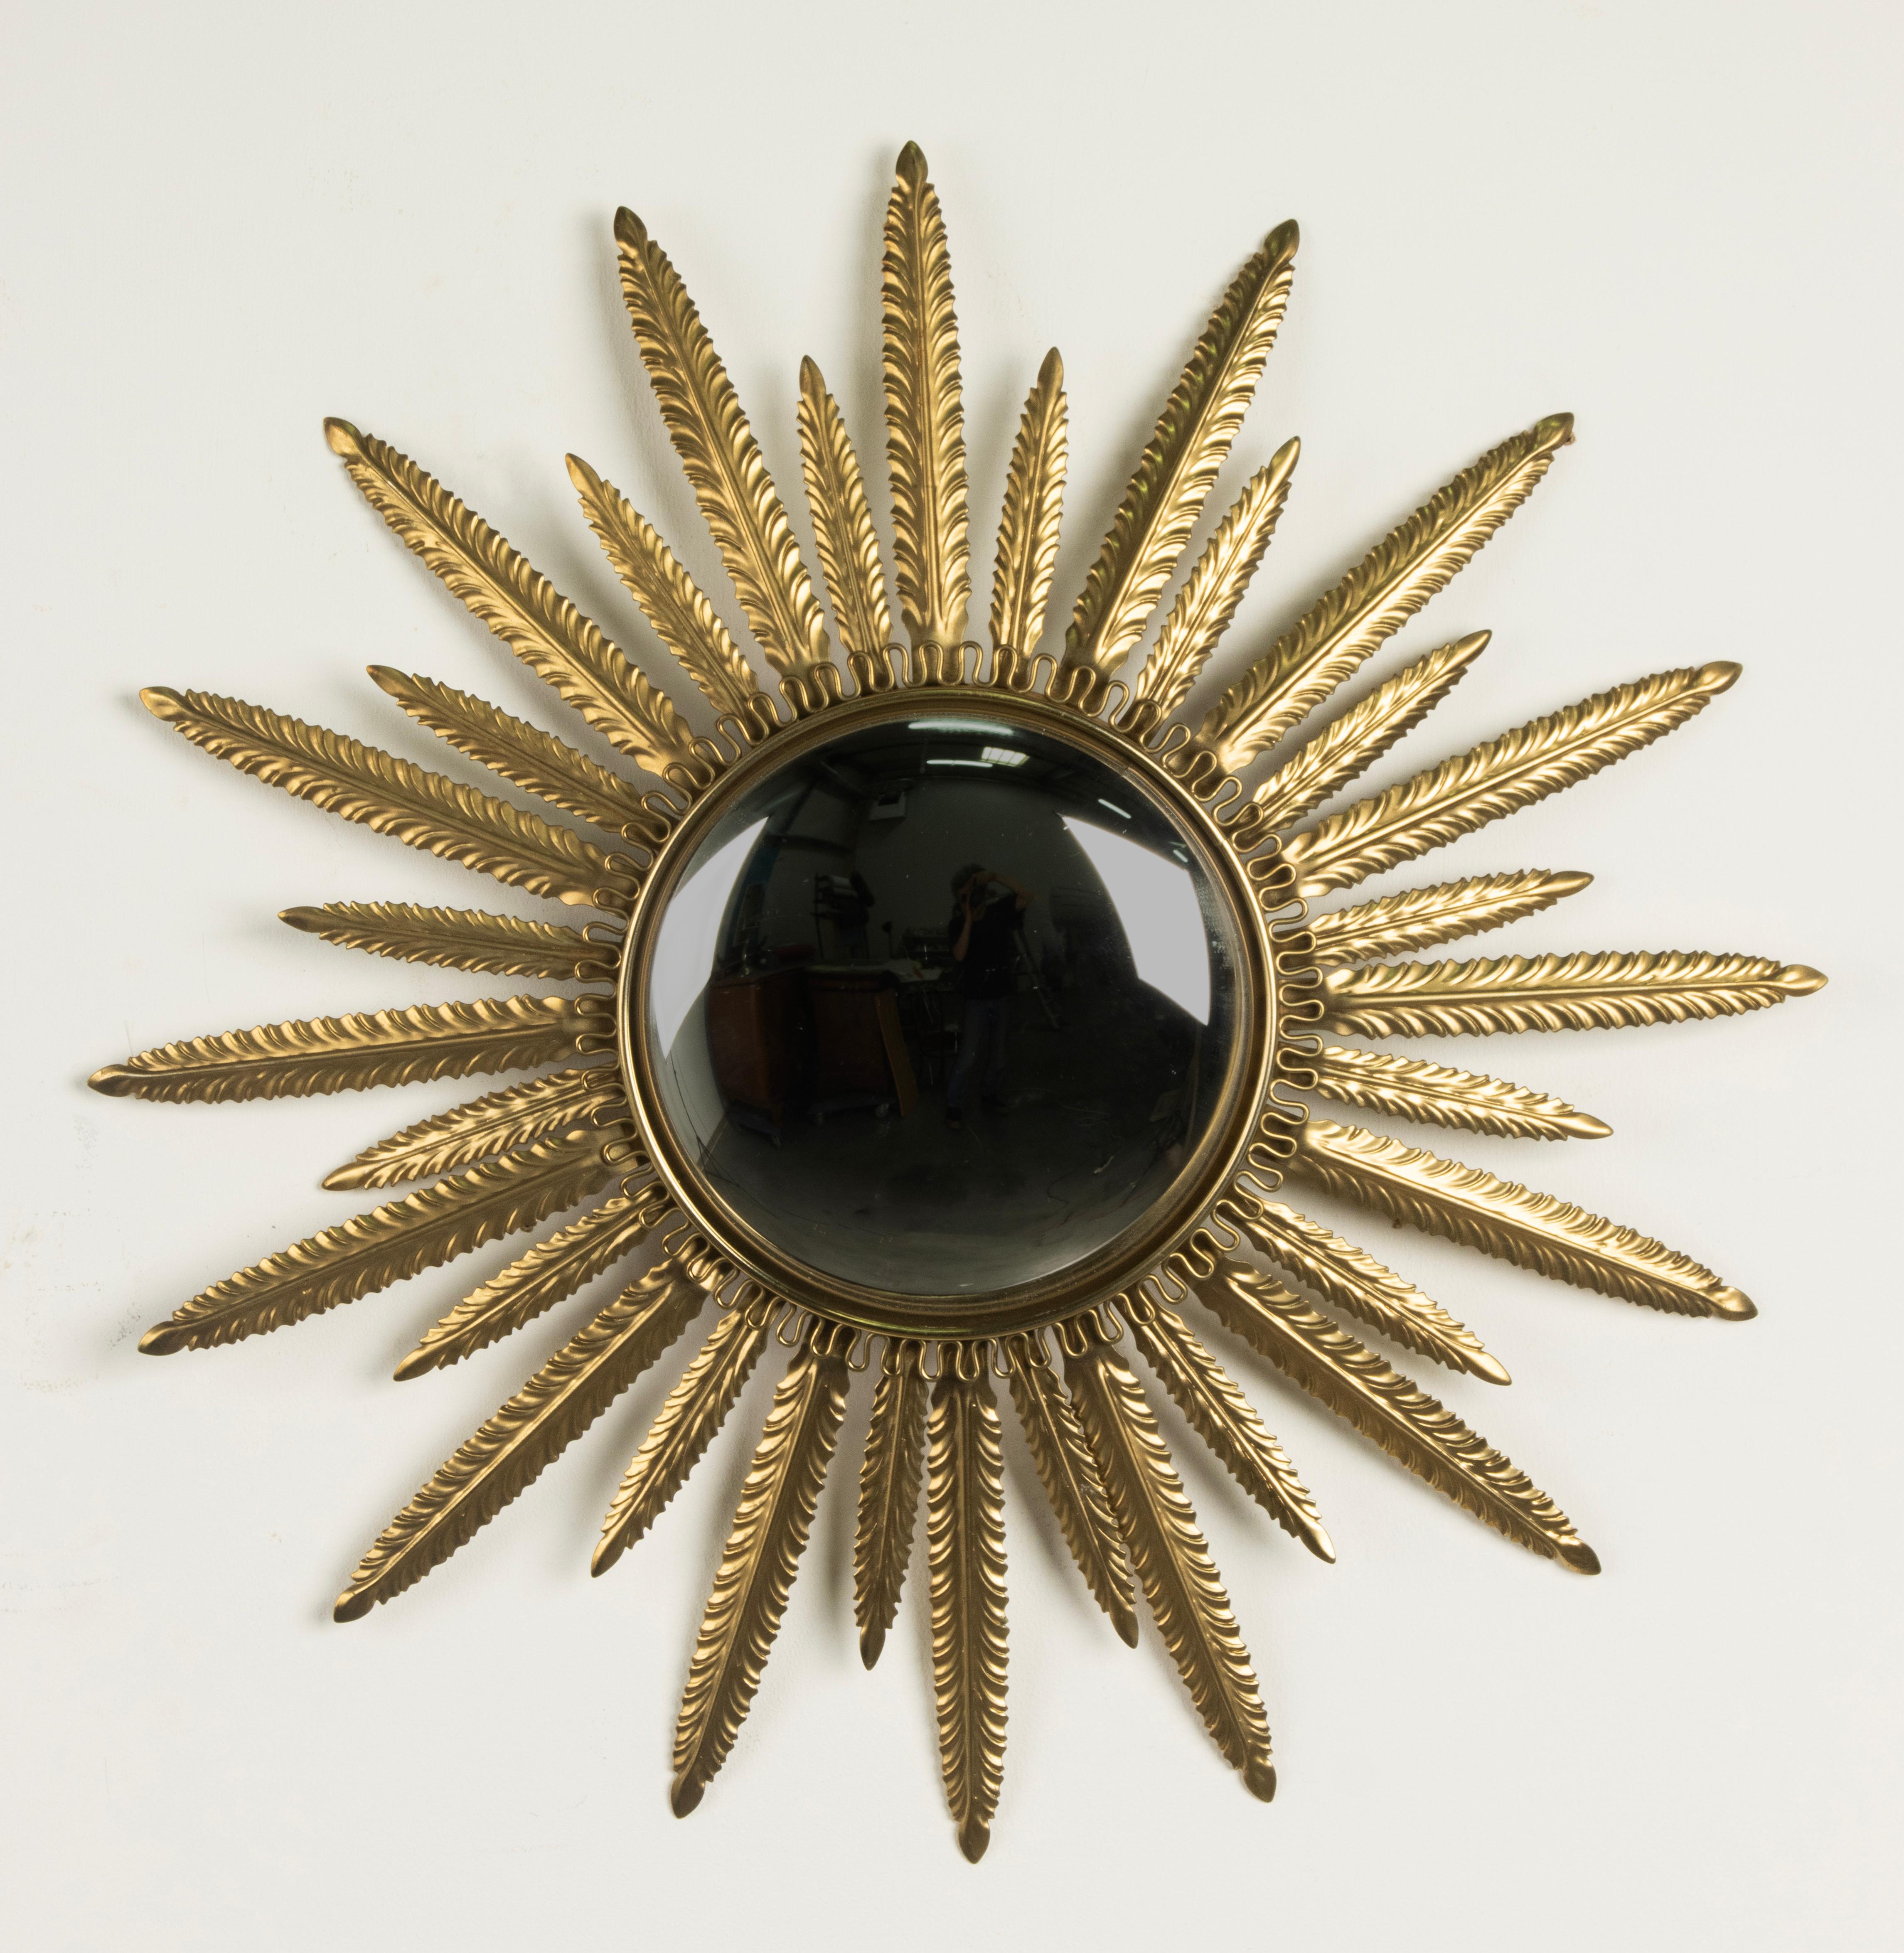 A Mid 20th century foliate sunburst convex mirror. Made of copper-colored patinated metal. Attributed to DeKnudt Mirros, made in Belgium around 1960-1970. The glass is in good condition, no cracks or damages. Small scratches on the